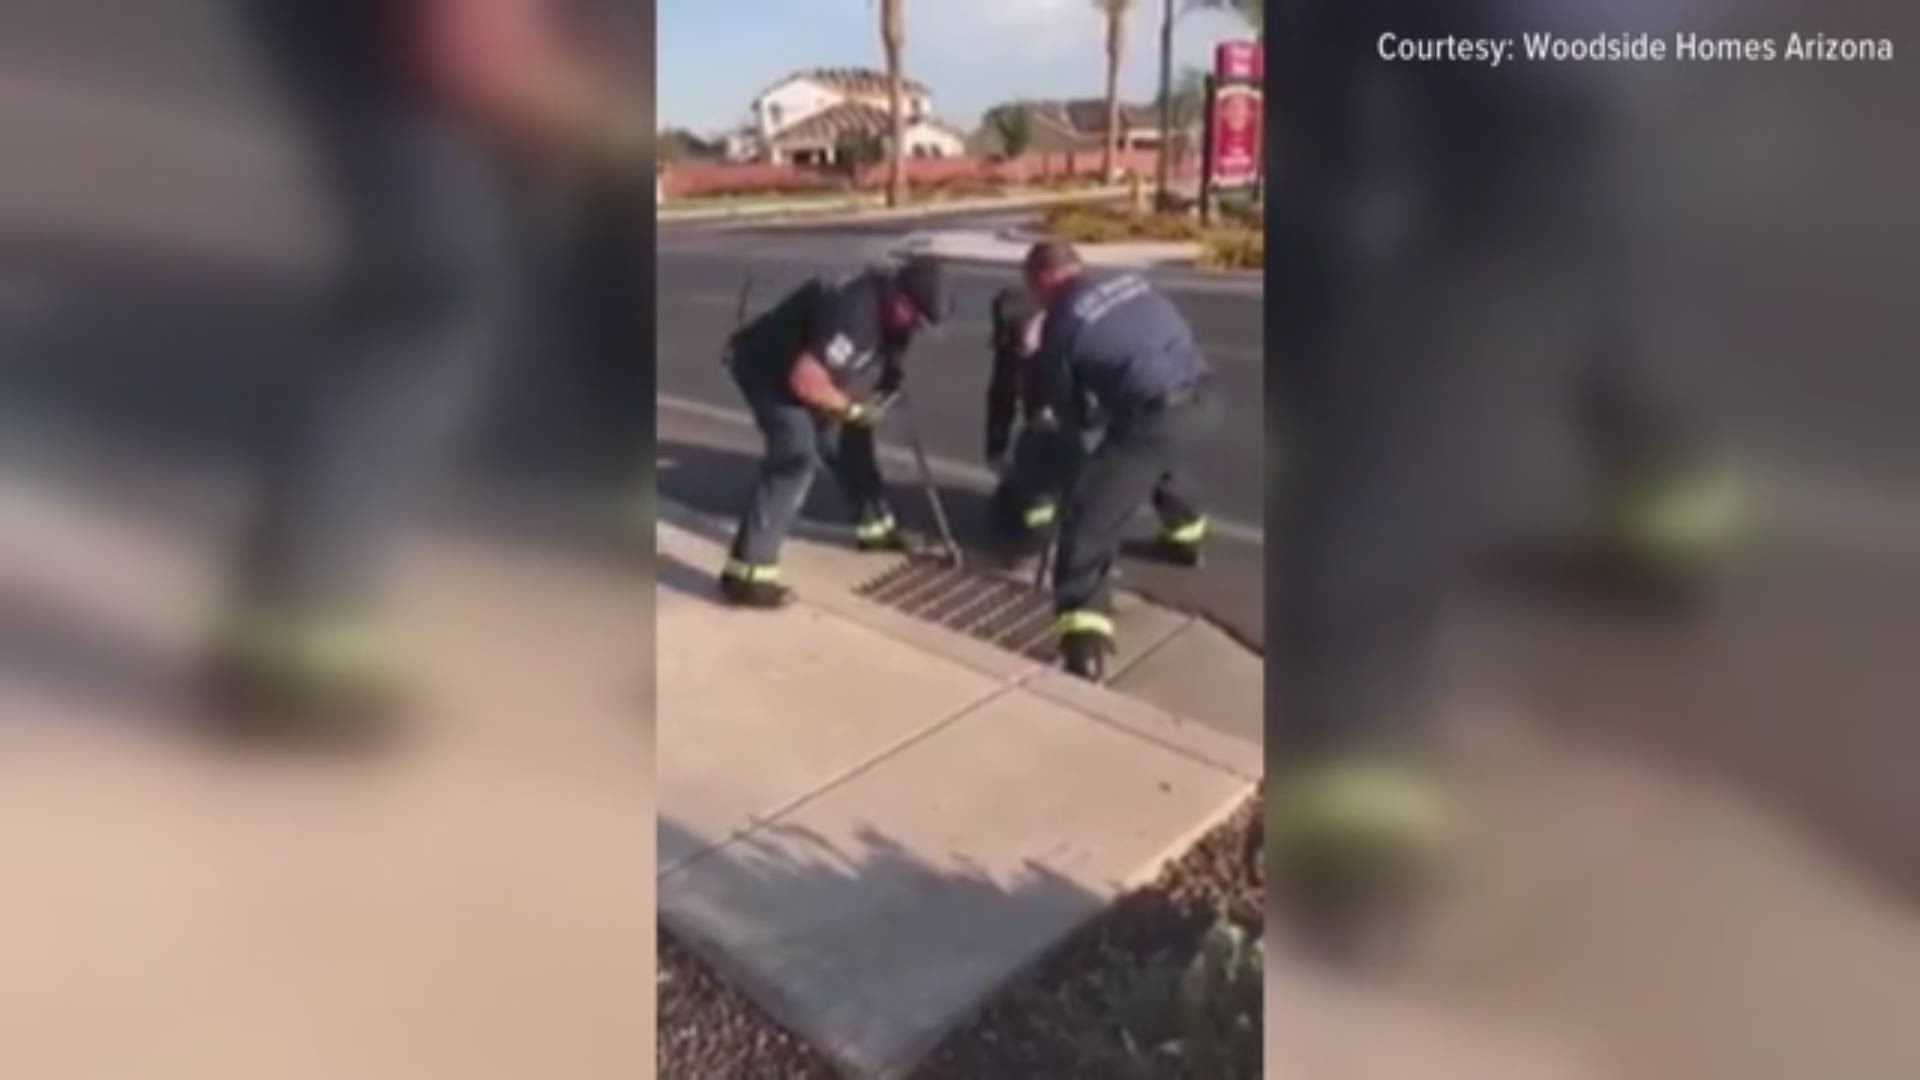 A Gilbert Fire and Rescue crew recently rescued a group of ducklings from a storm drain at the Bungalows at Cooley Station in Gilbert, Arizona. (Video: Woodside Homes Bungalows at Cooley Station)